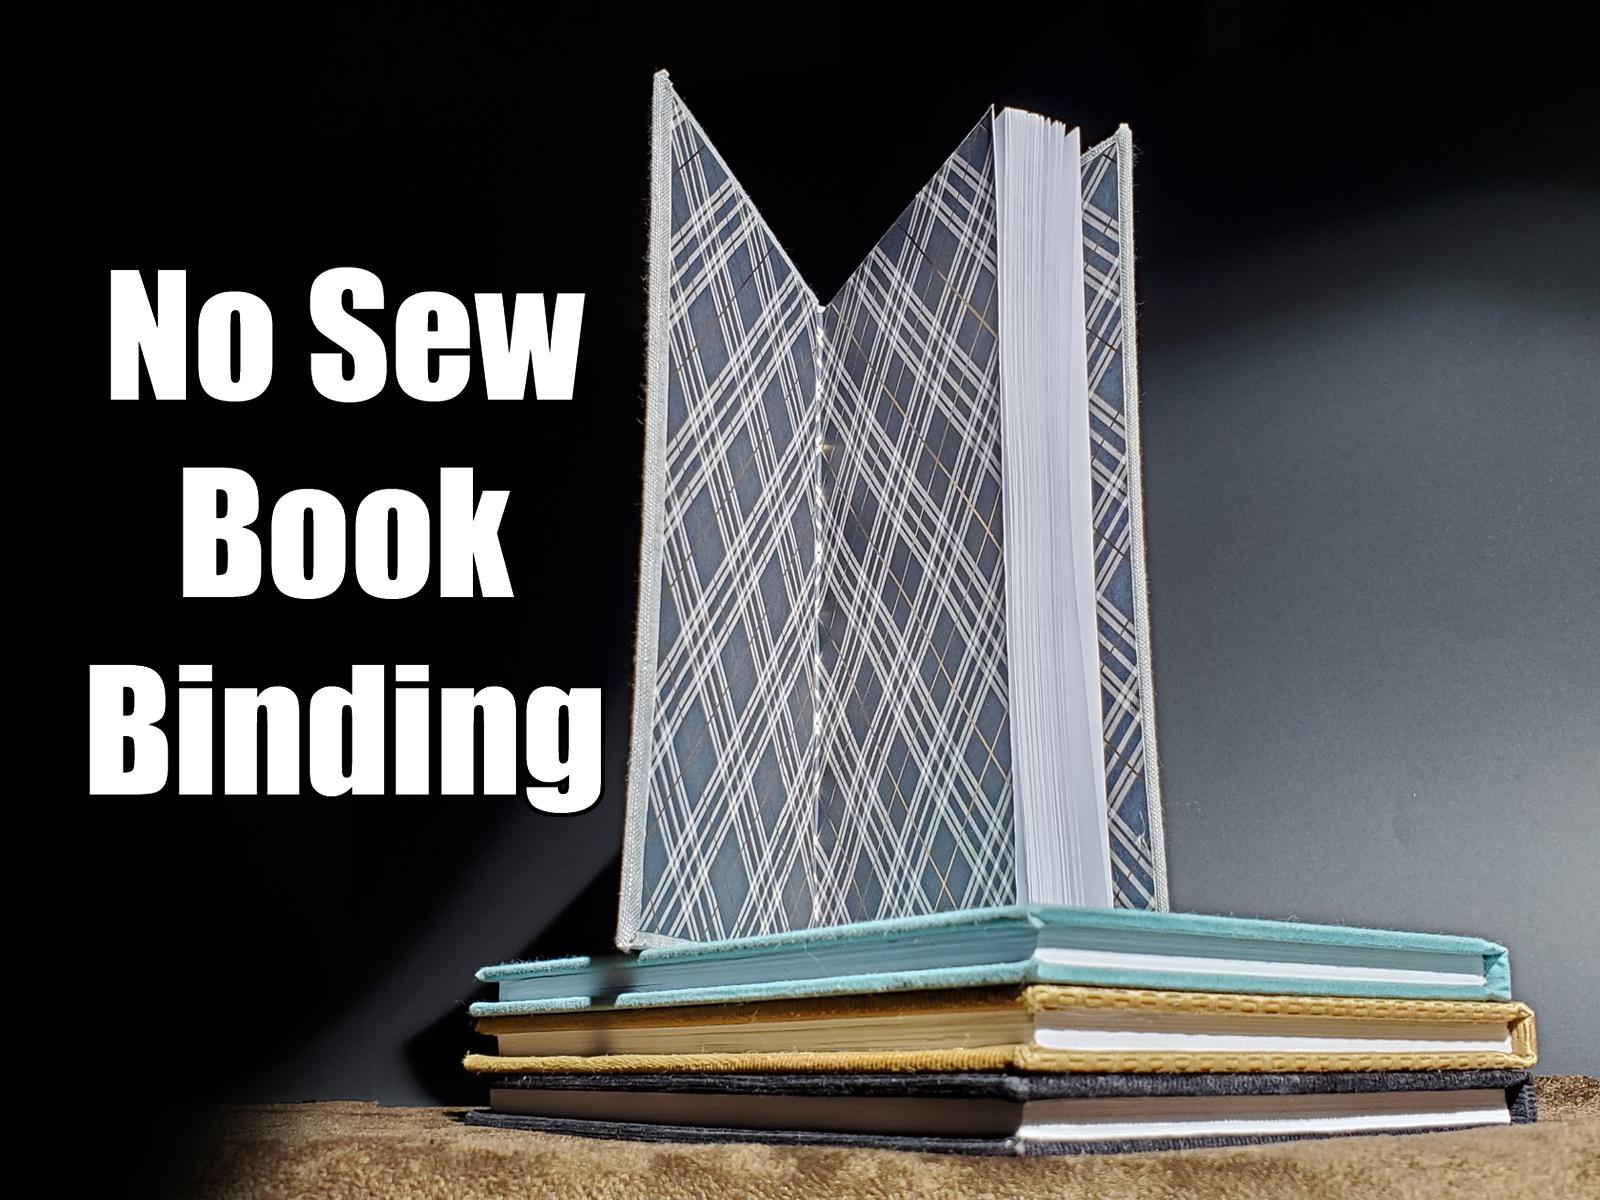 No Sew Book Binding - Easier Way to Make a Sketch Book?